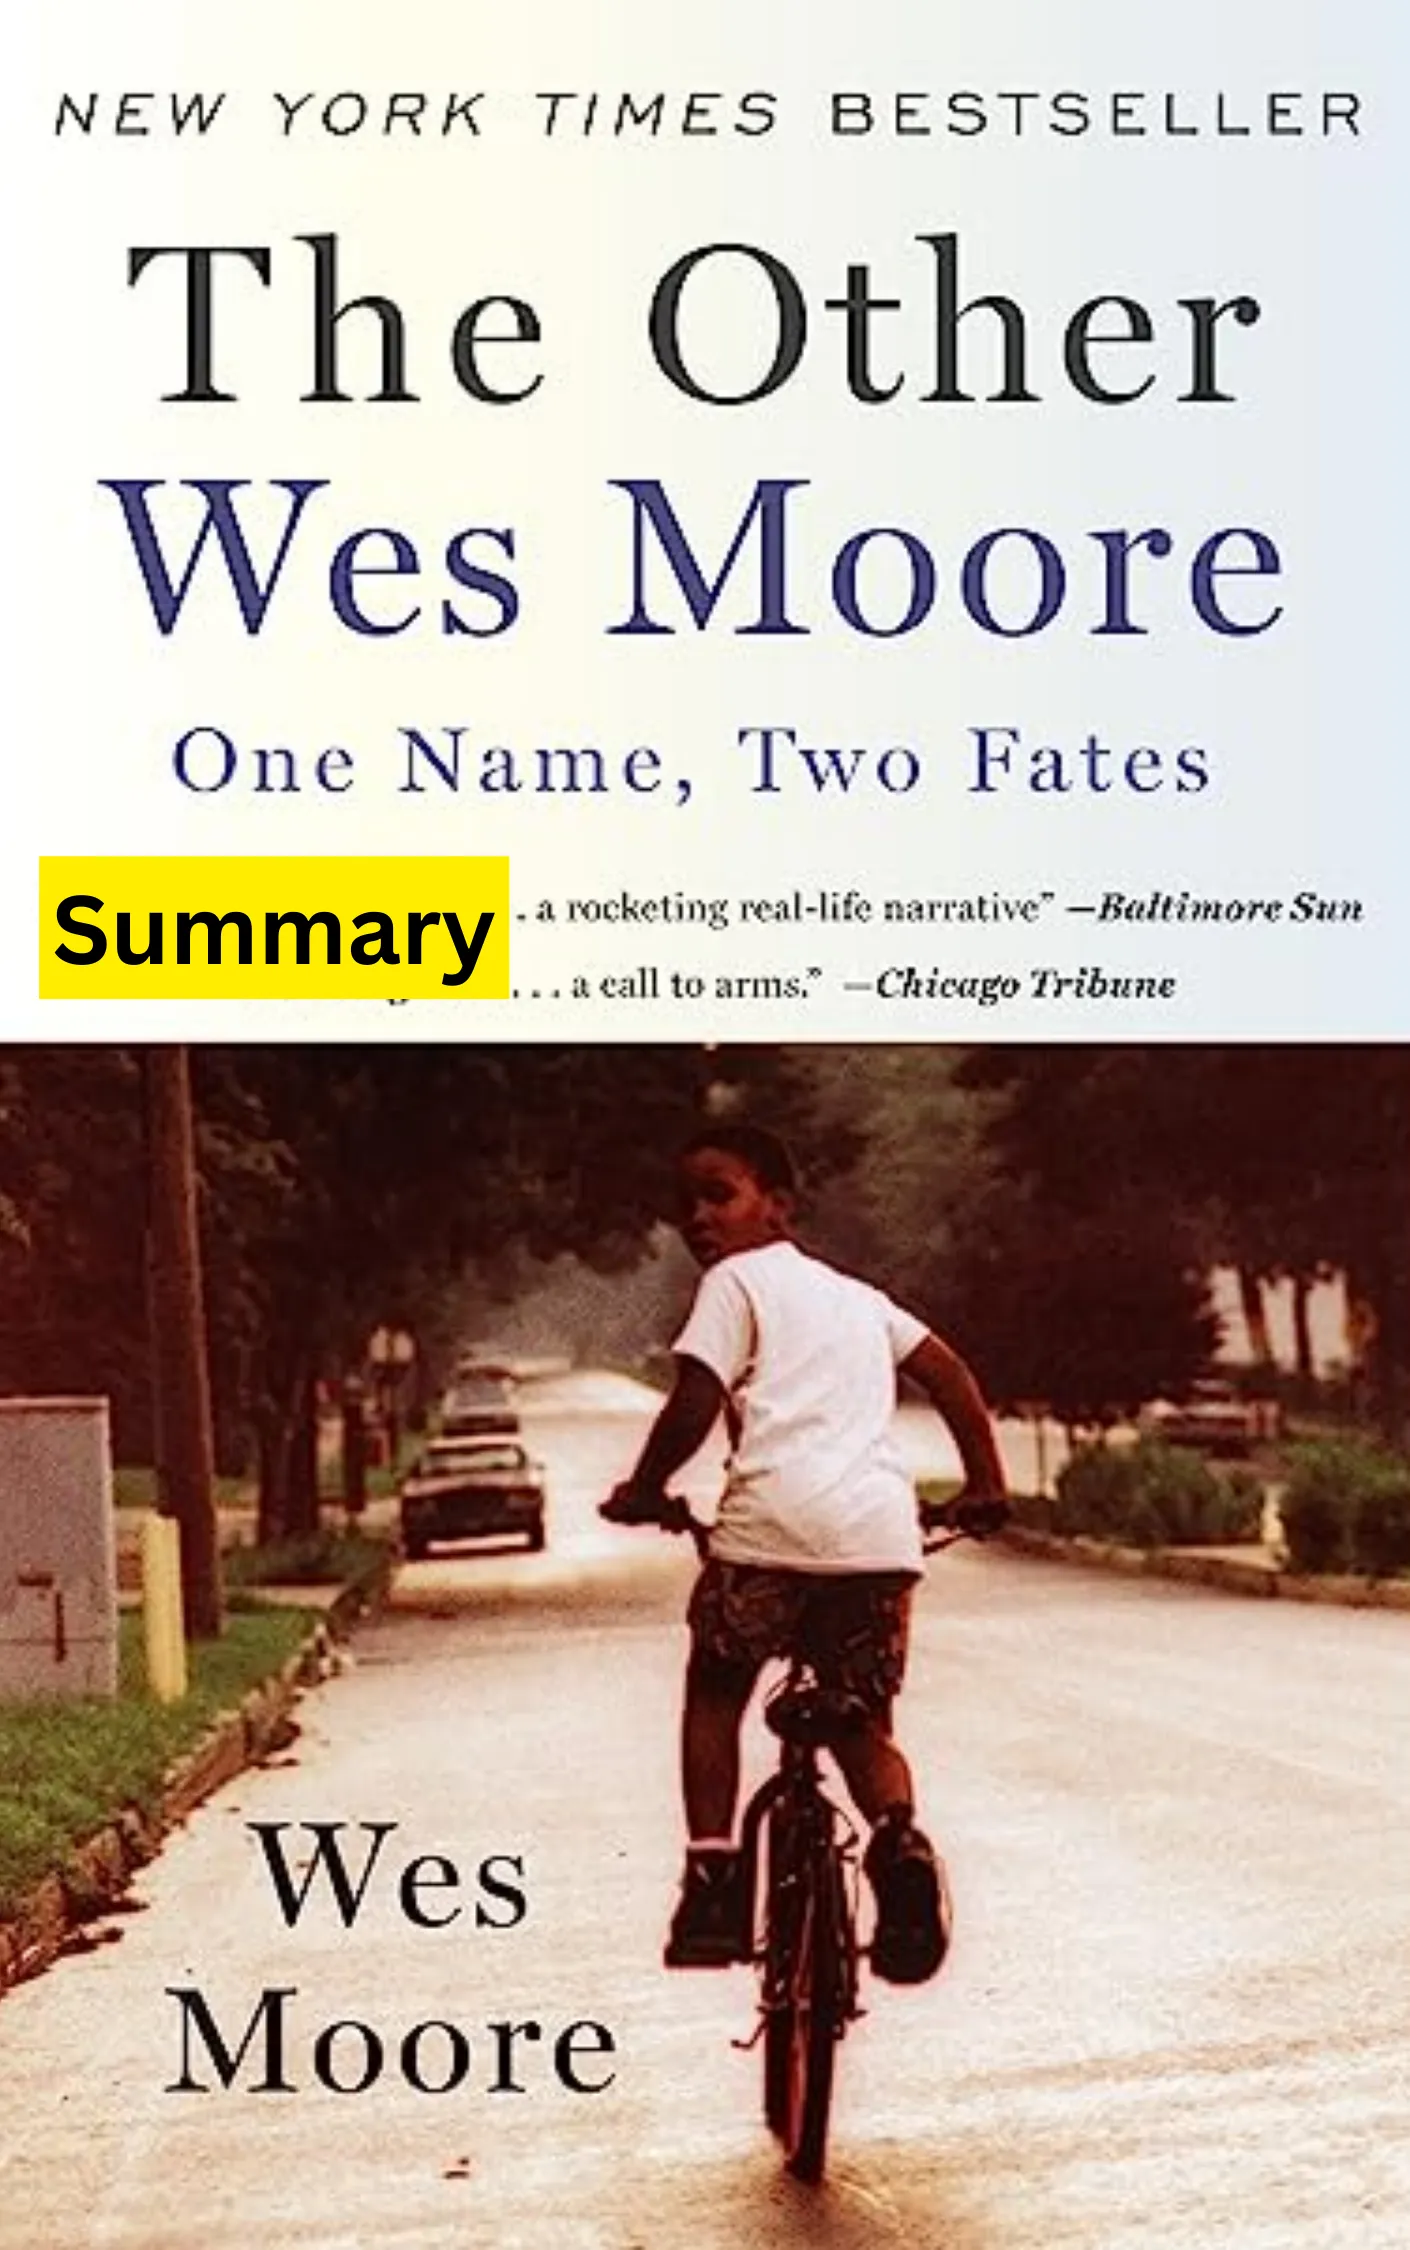 The Other Wes Moore Summary